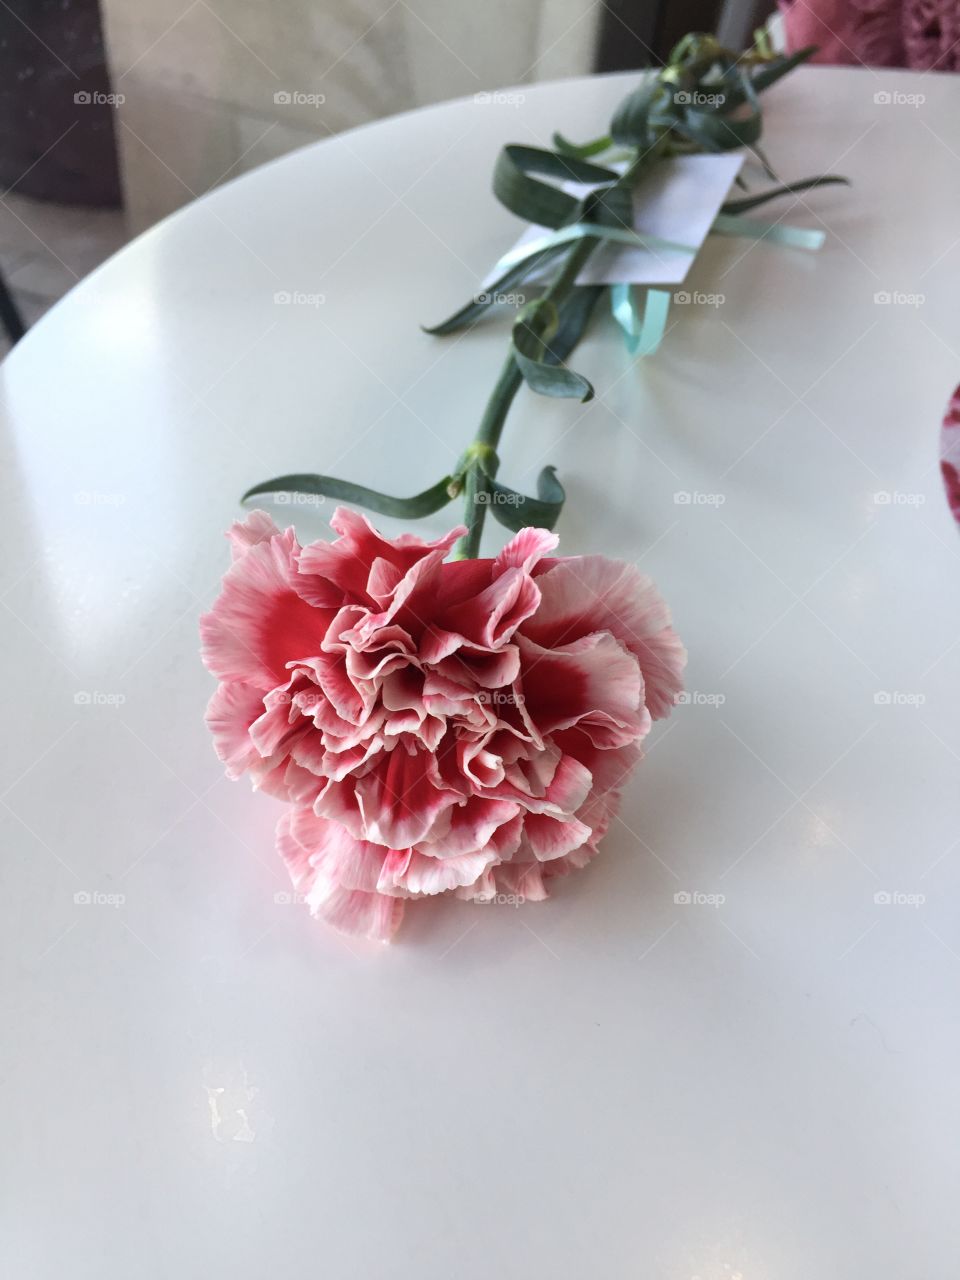 Carnation for mothers day